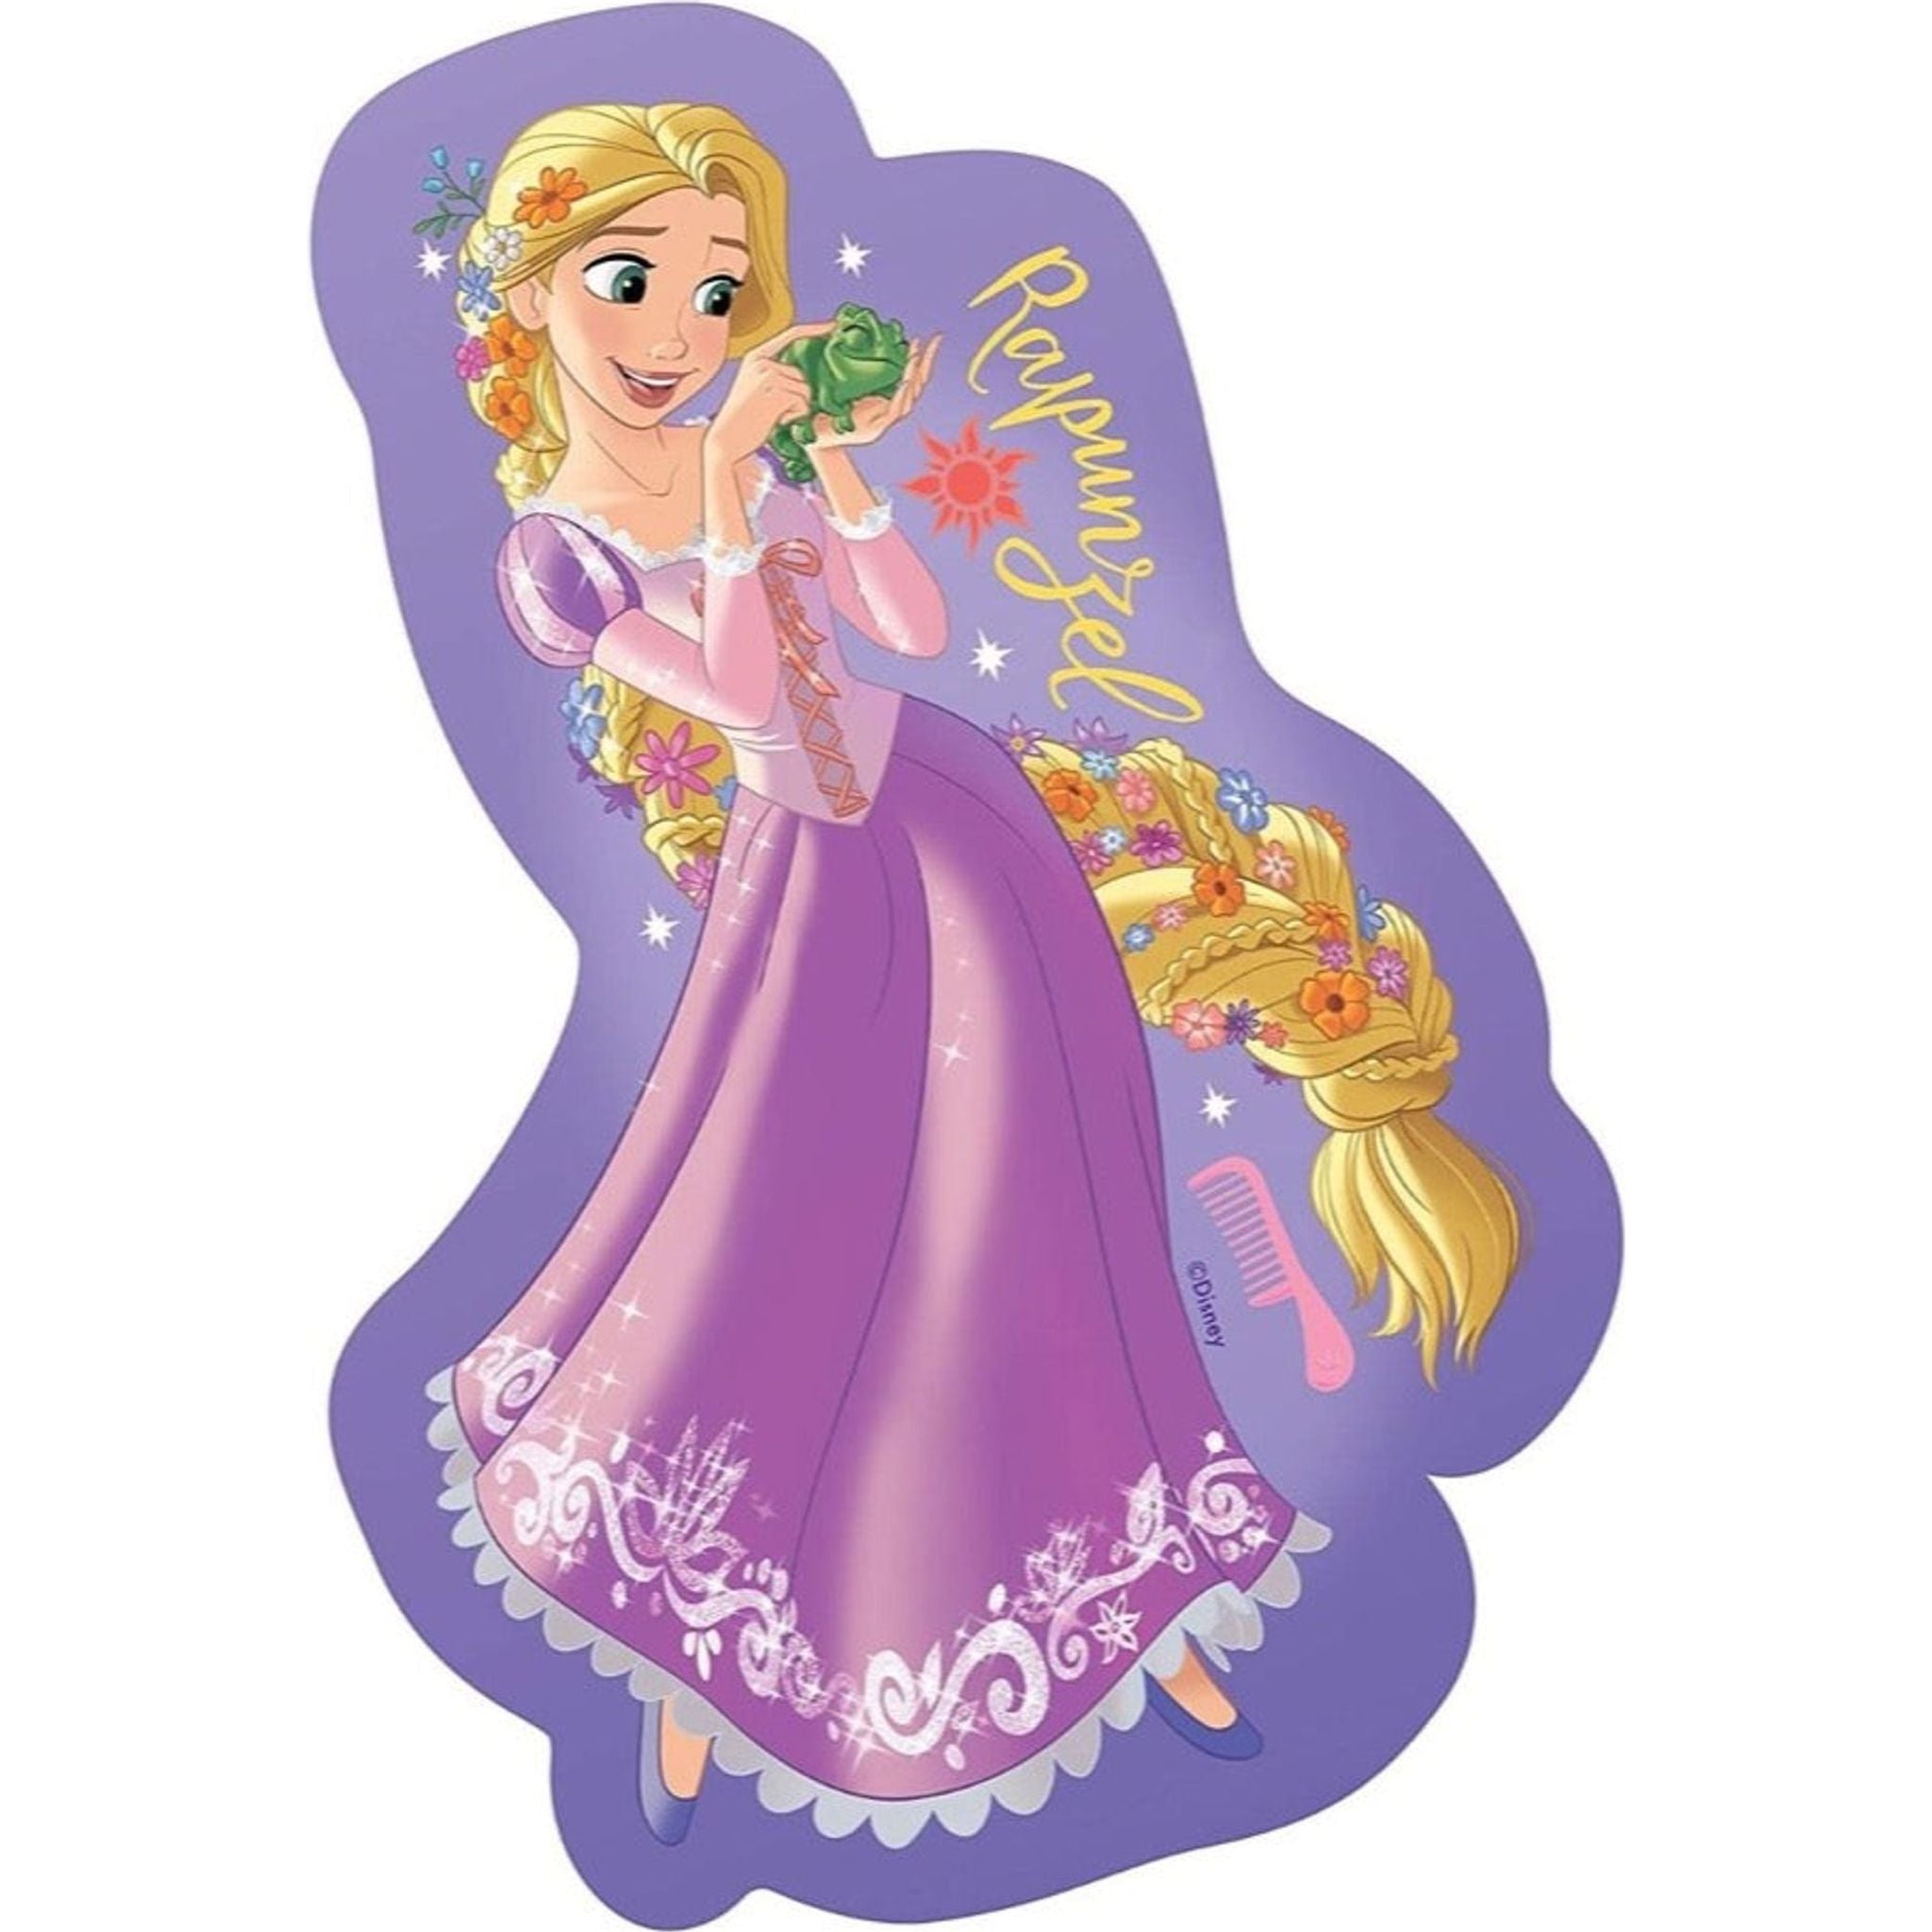 Ravensburger - Disney Princess 4 Shaped Puzzle in a Box - Toybox Tales